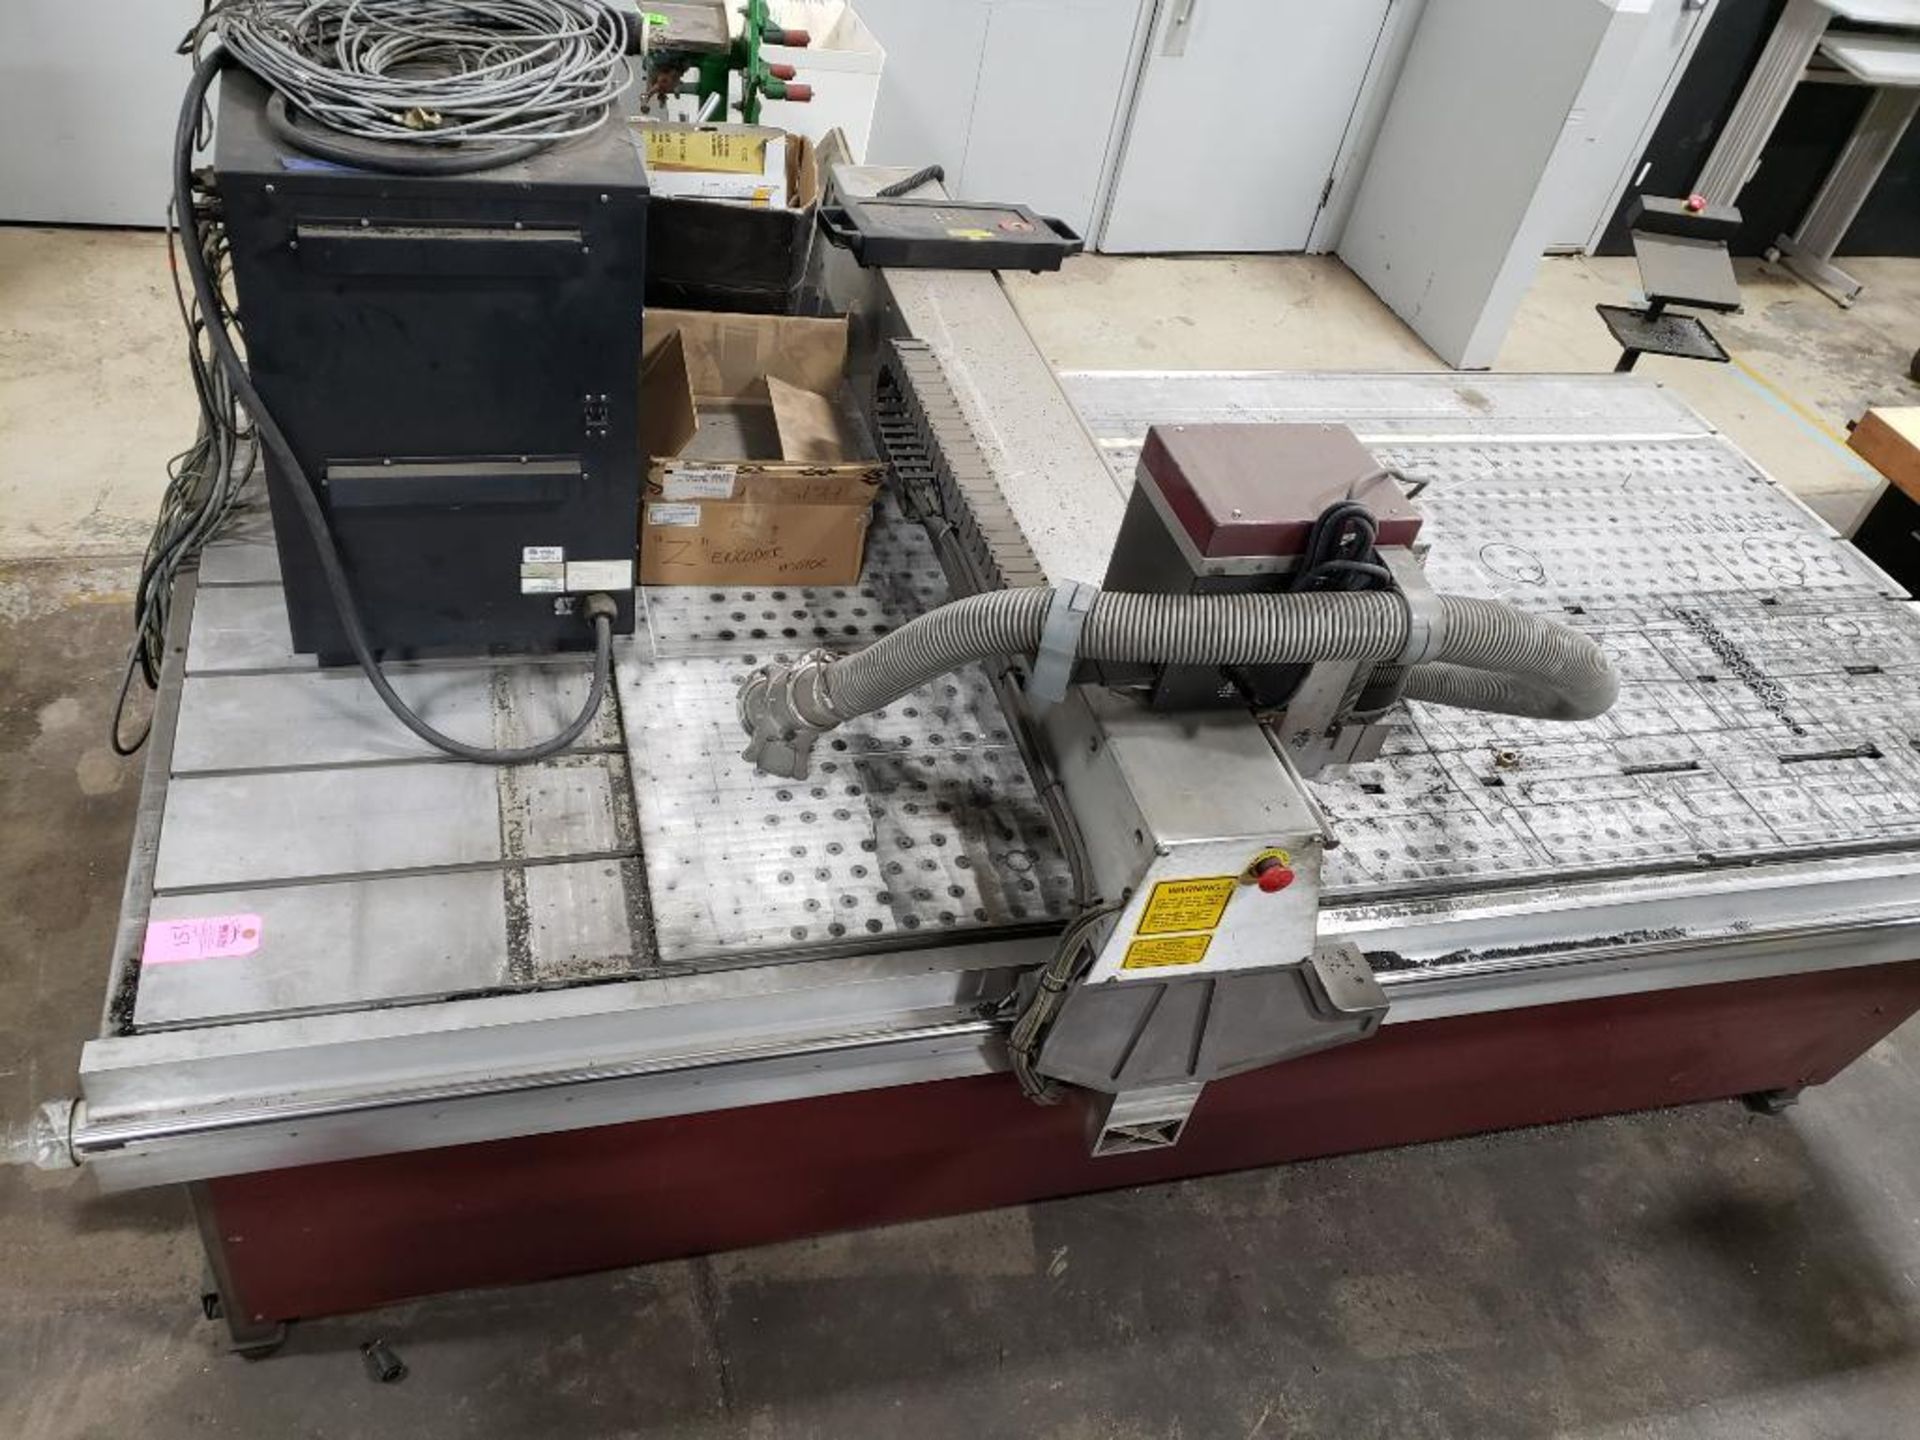 (Parts/Repairable) Gerber Sabre Model 408 CNC router. 54in x 121in table. 208-240v single phase.